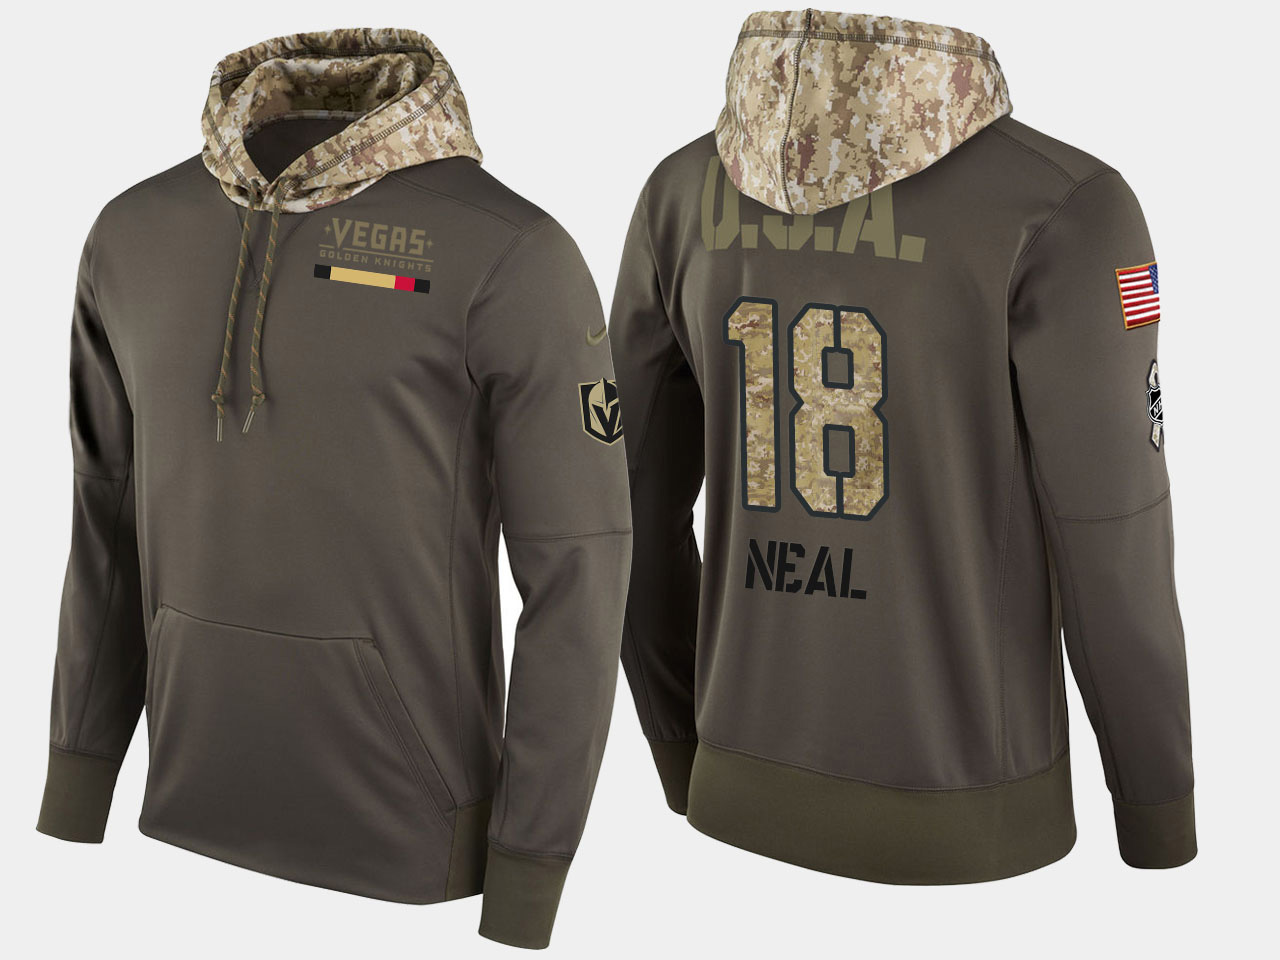 Nike Vegas Golden Knights 18 James Neal Olive Salute To Service Pullover Hoodie